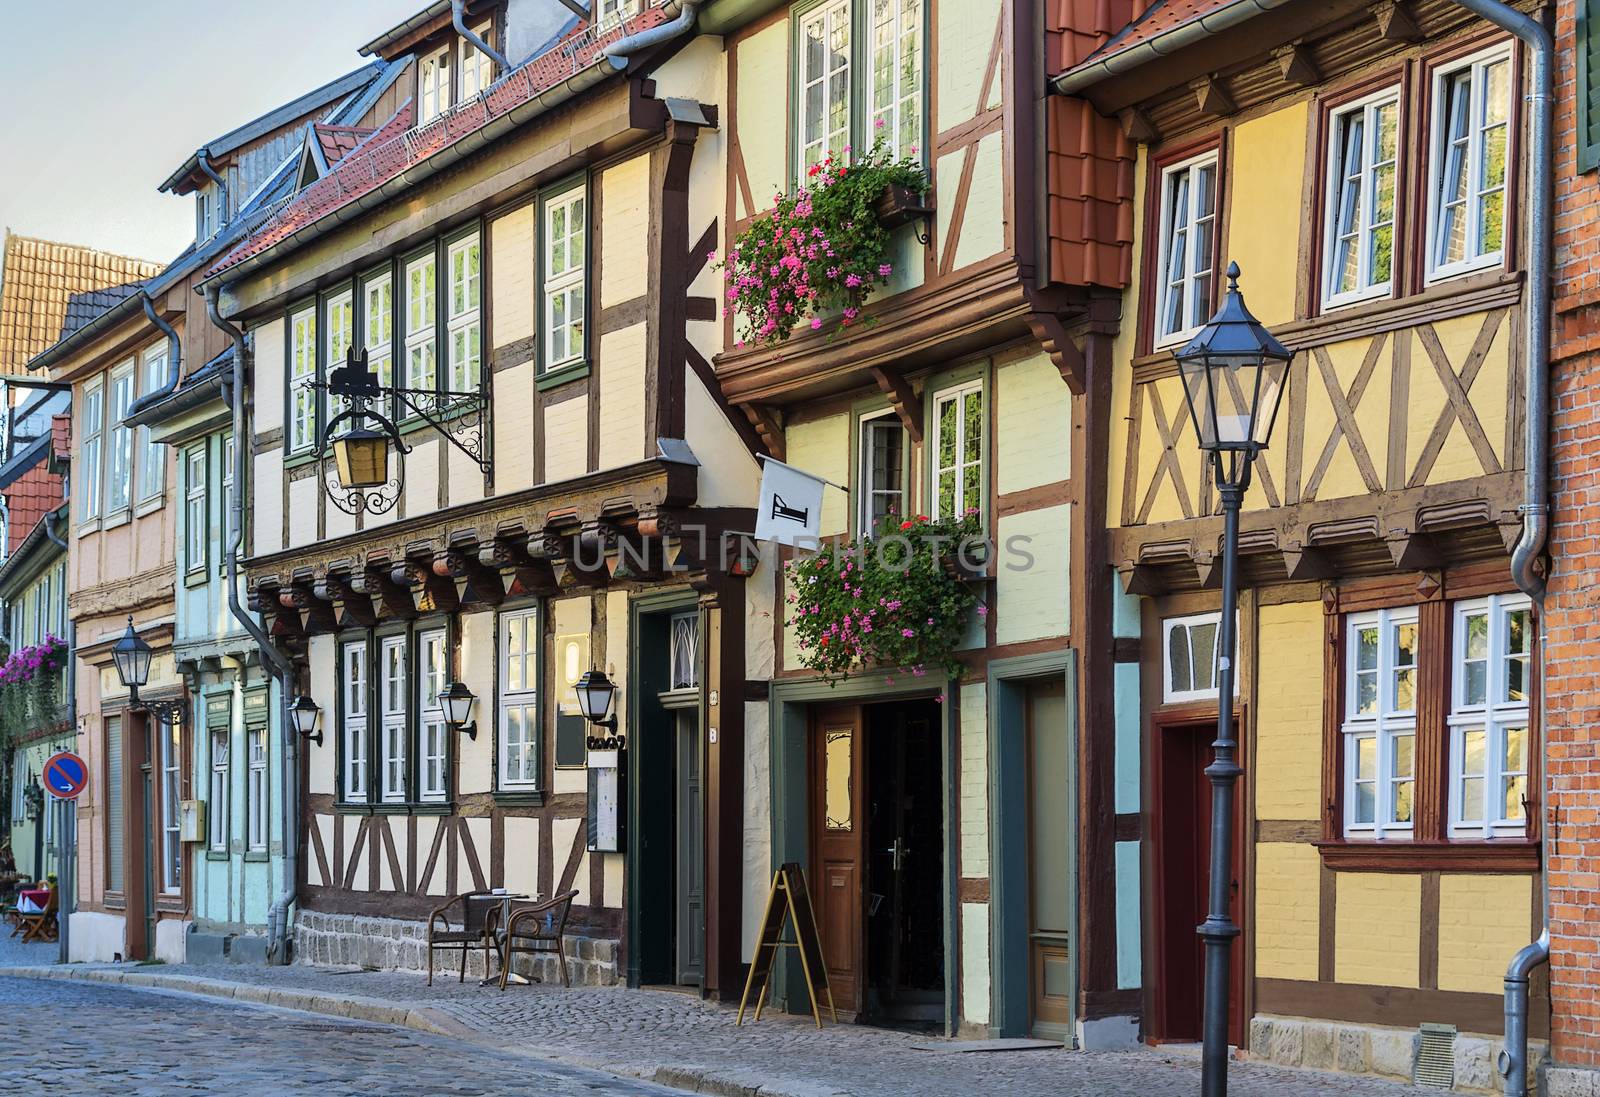 the street with half-timbered houses in Quedlinburg, Germany by borisb17